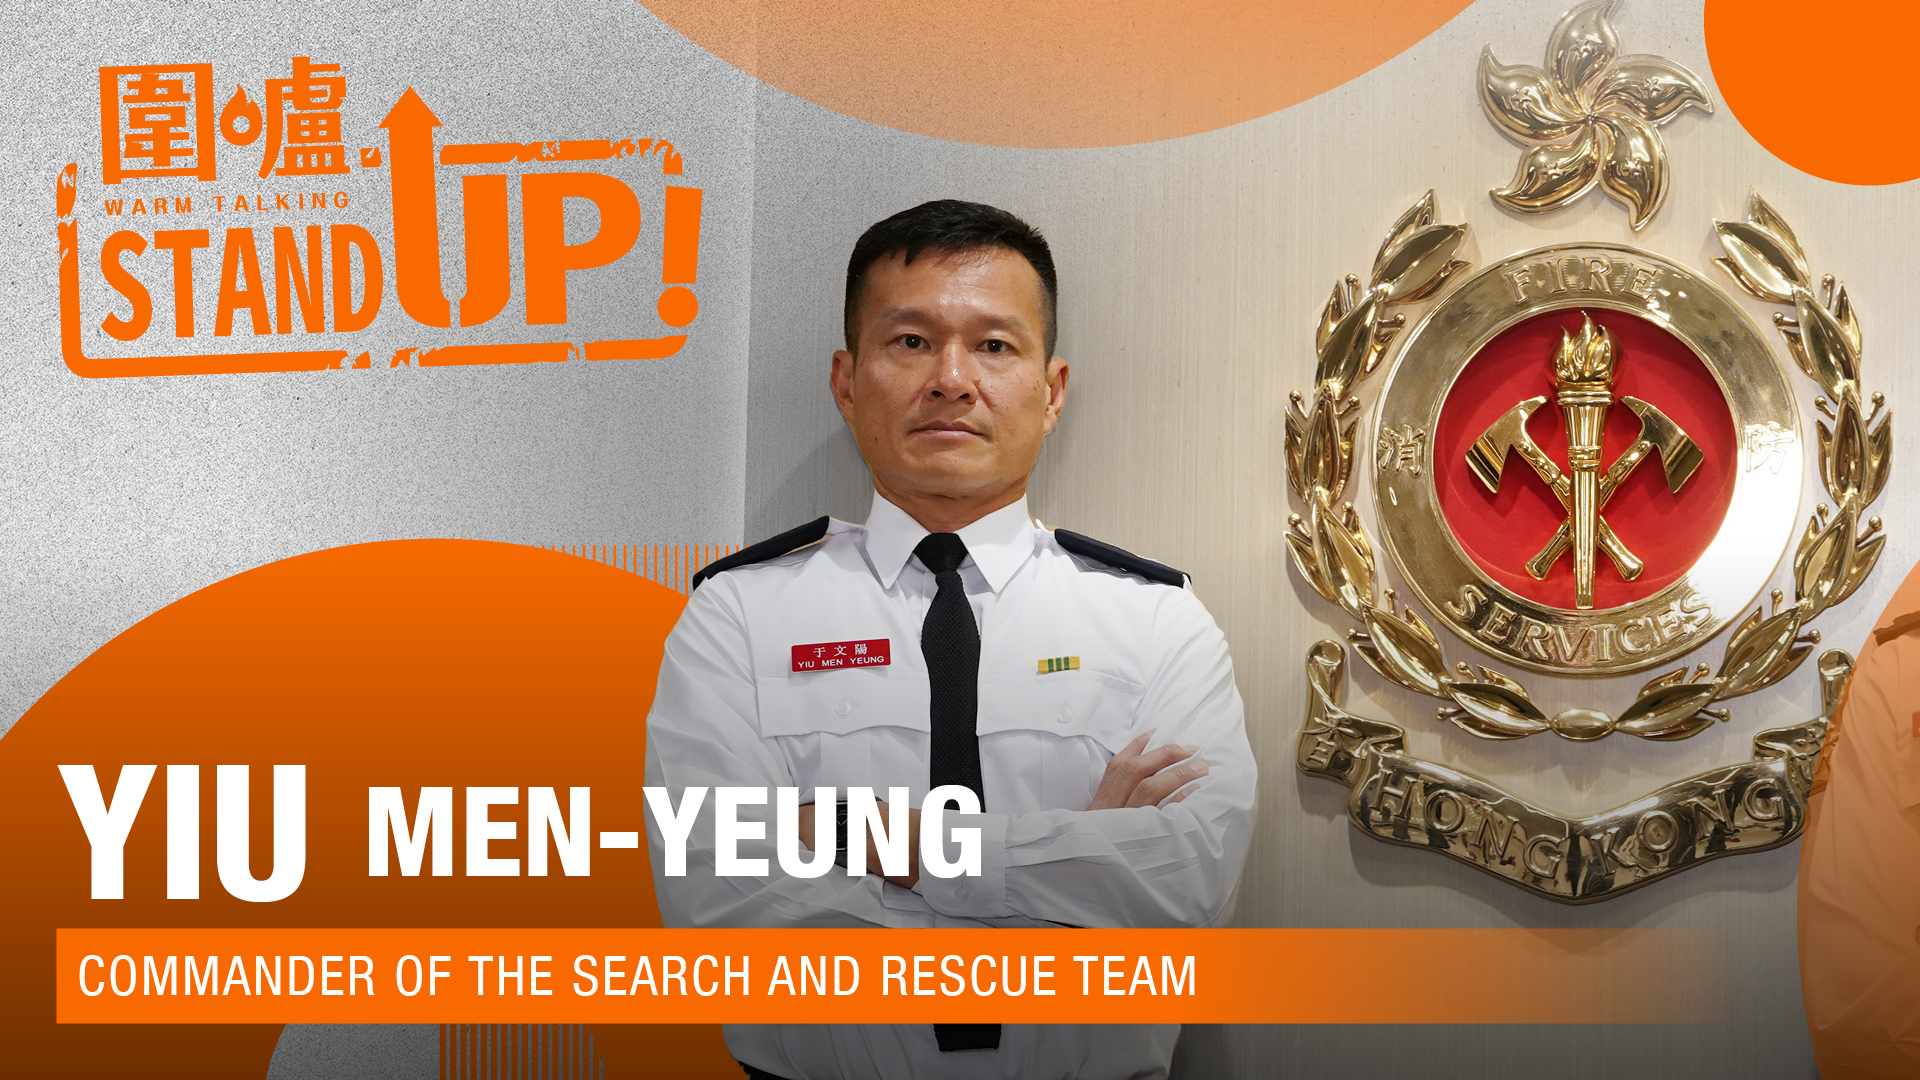 StandUp-|-HK-rescue-team-shares-memorable-experiences-from-Turkey-mission